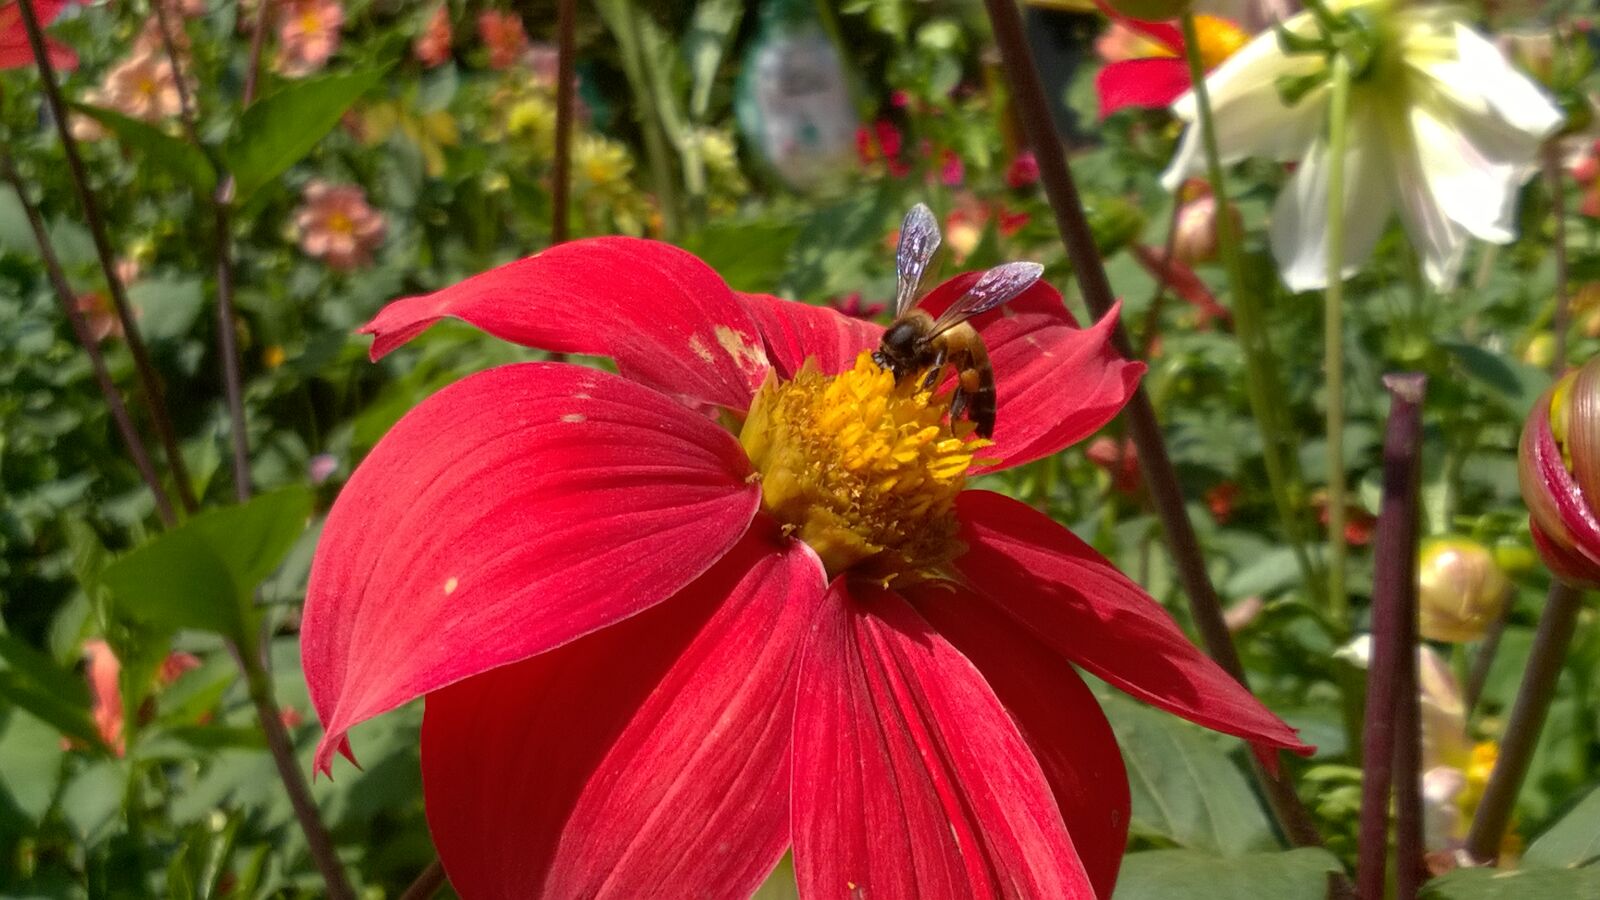 Nokia Lumia 730 Dual SIM sample photo. Flower, red, flowers, wasp photography